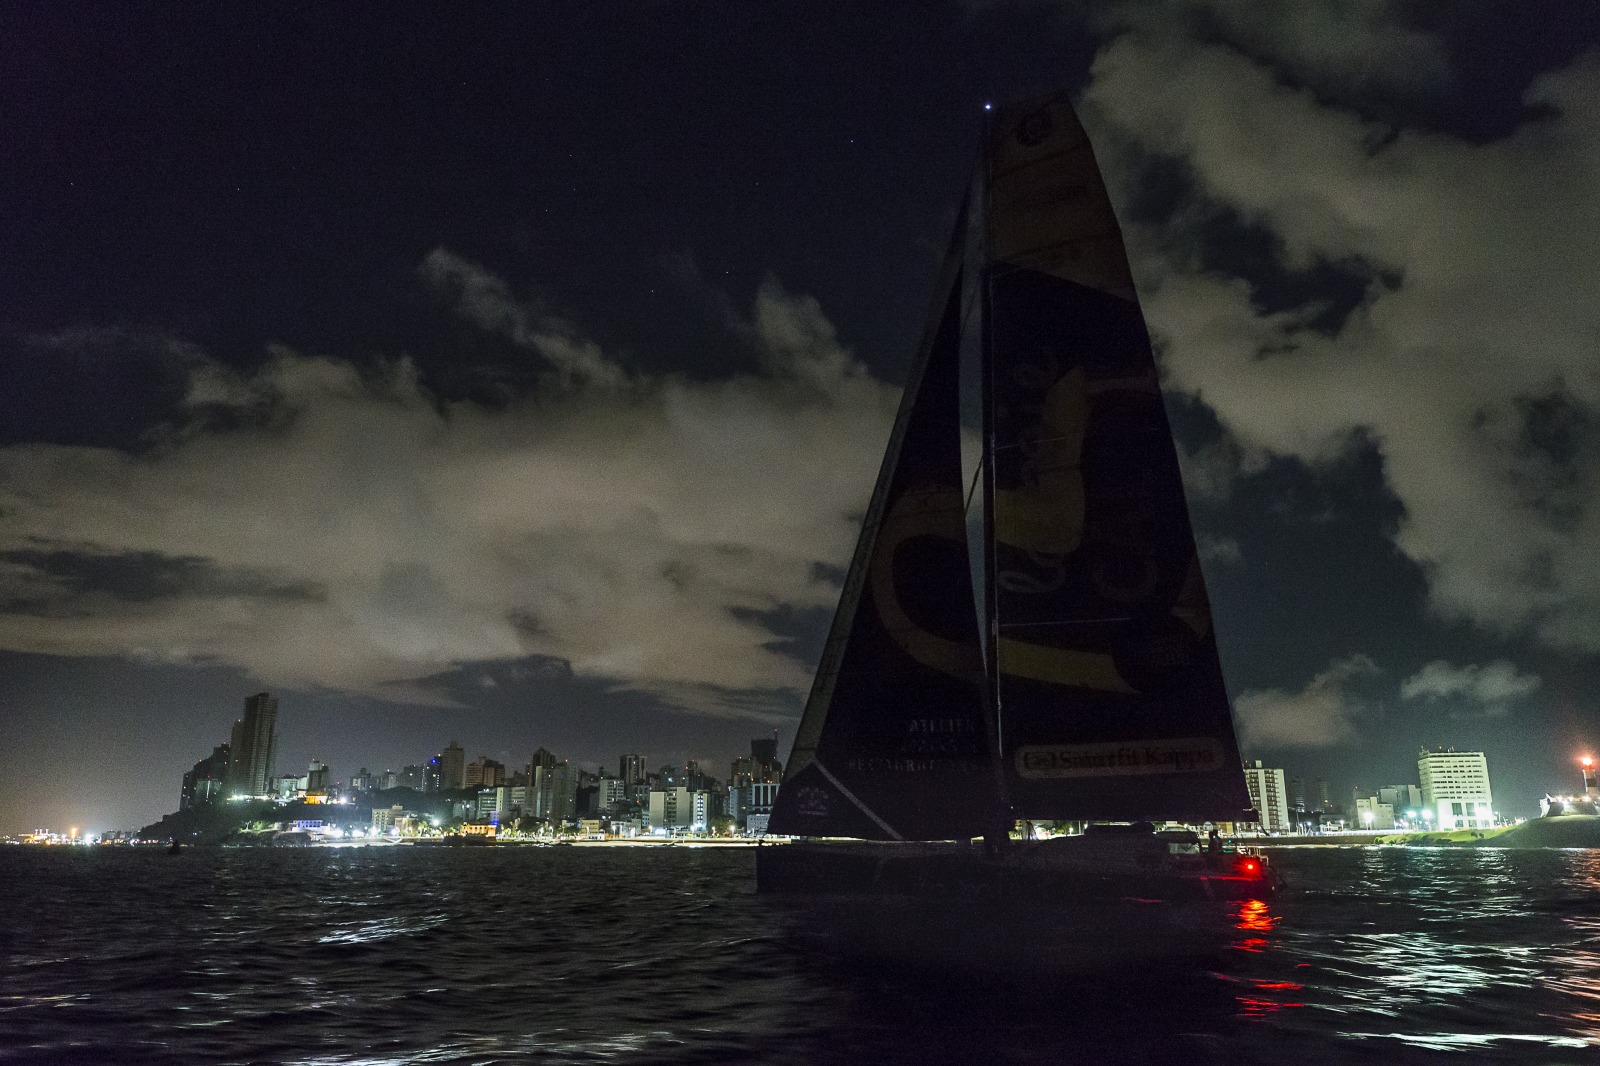  IMOCA Open 60, Class 40, Multi 50, Ultime  Transat Jacques Vabre  Le Havre FRA  Day 17